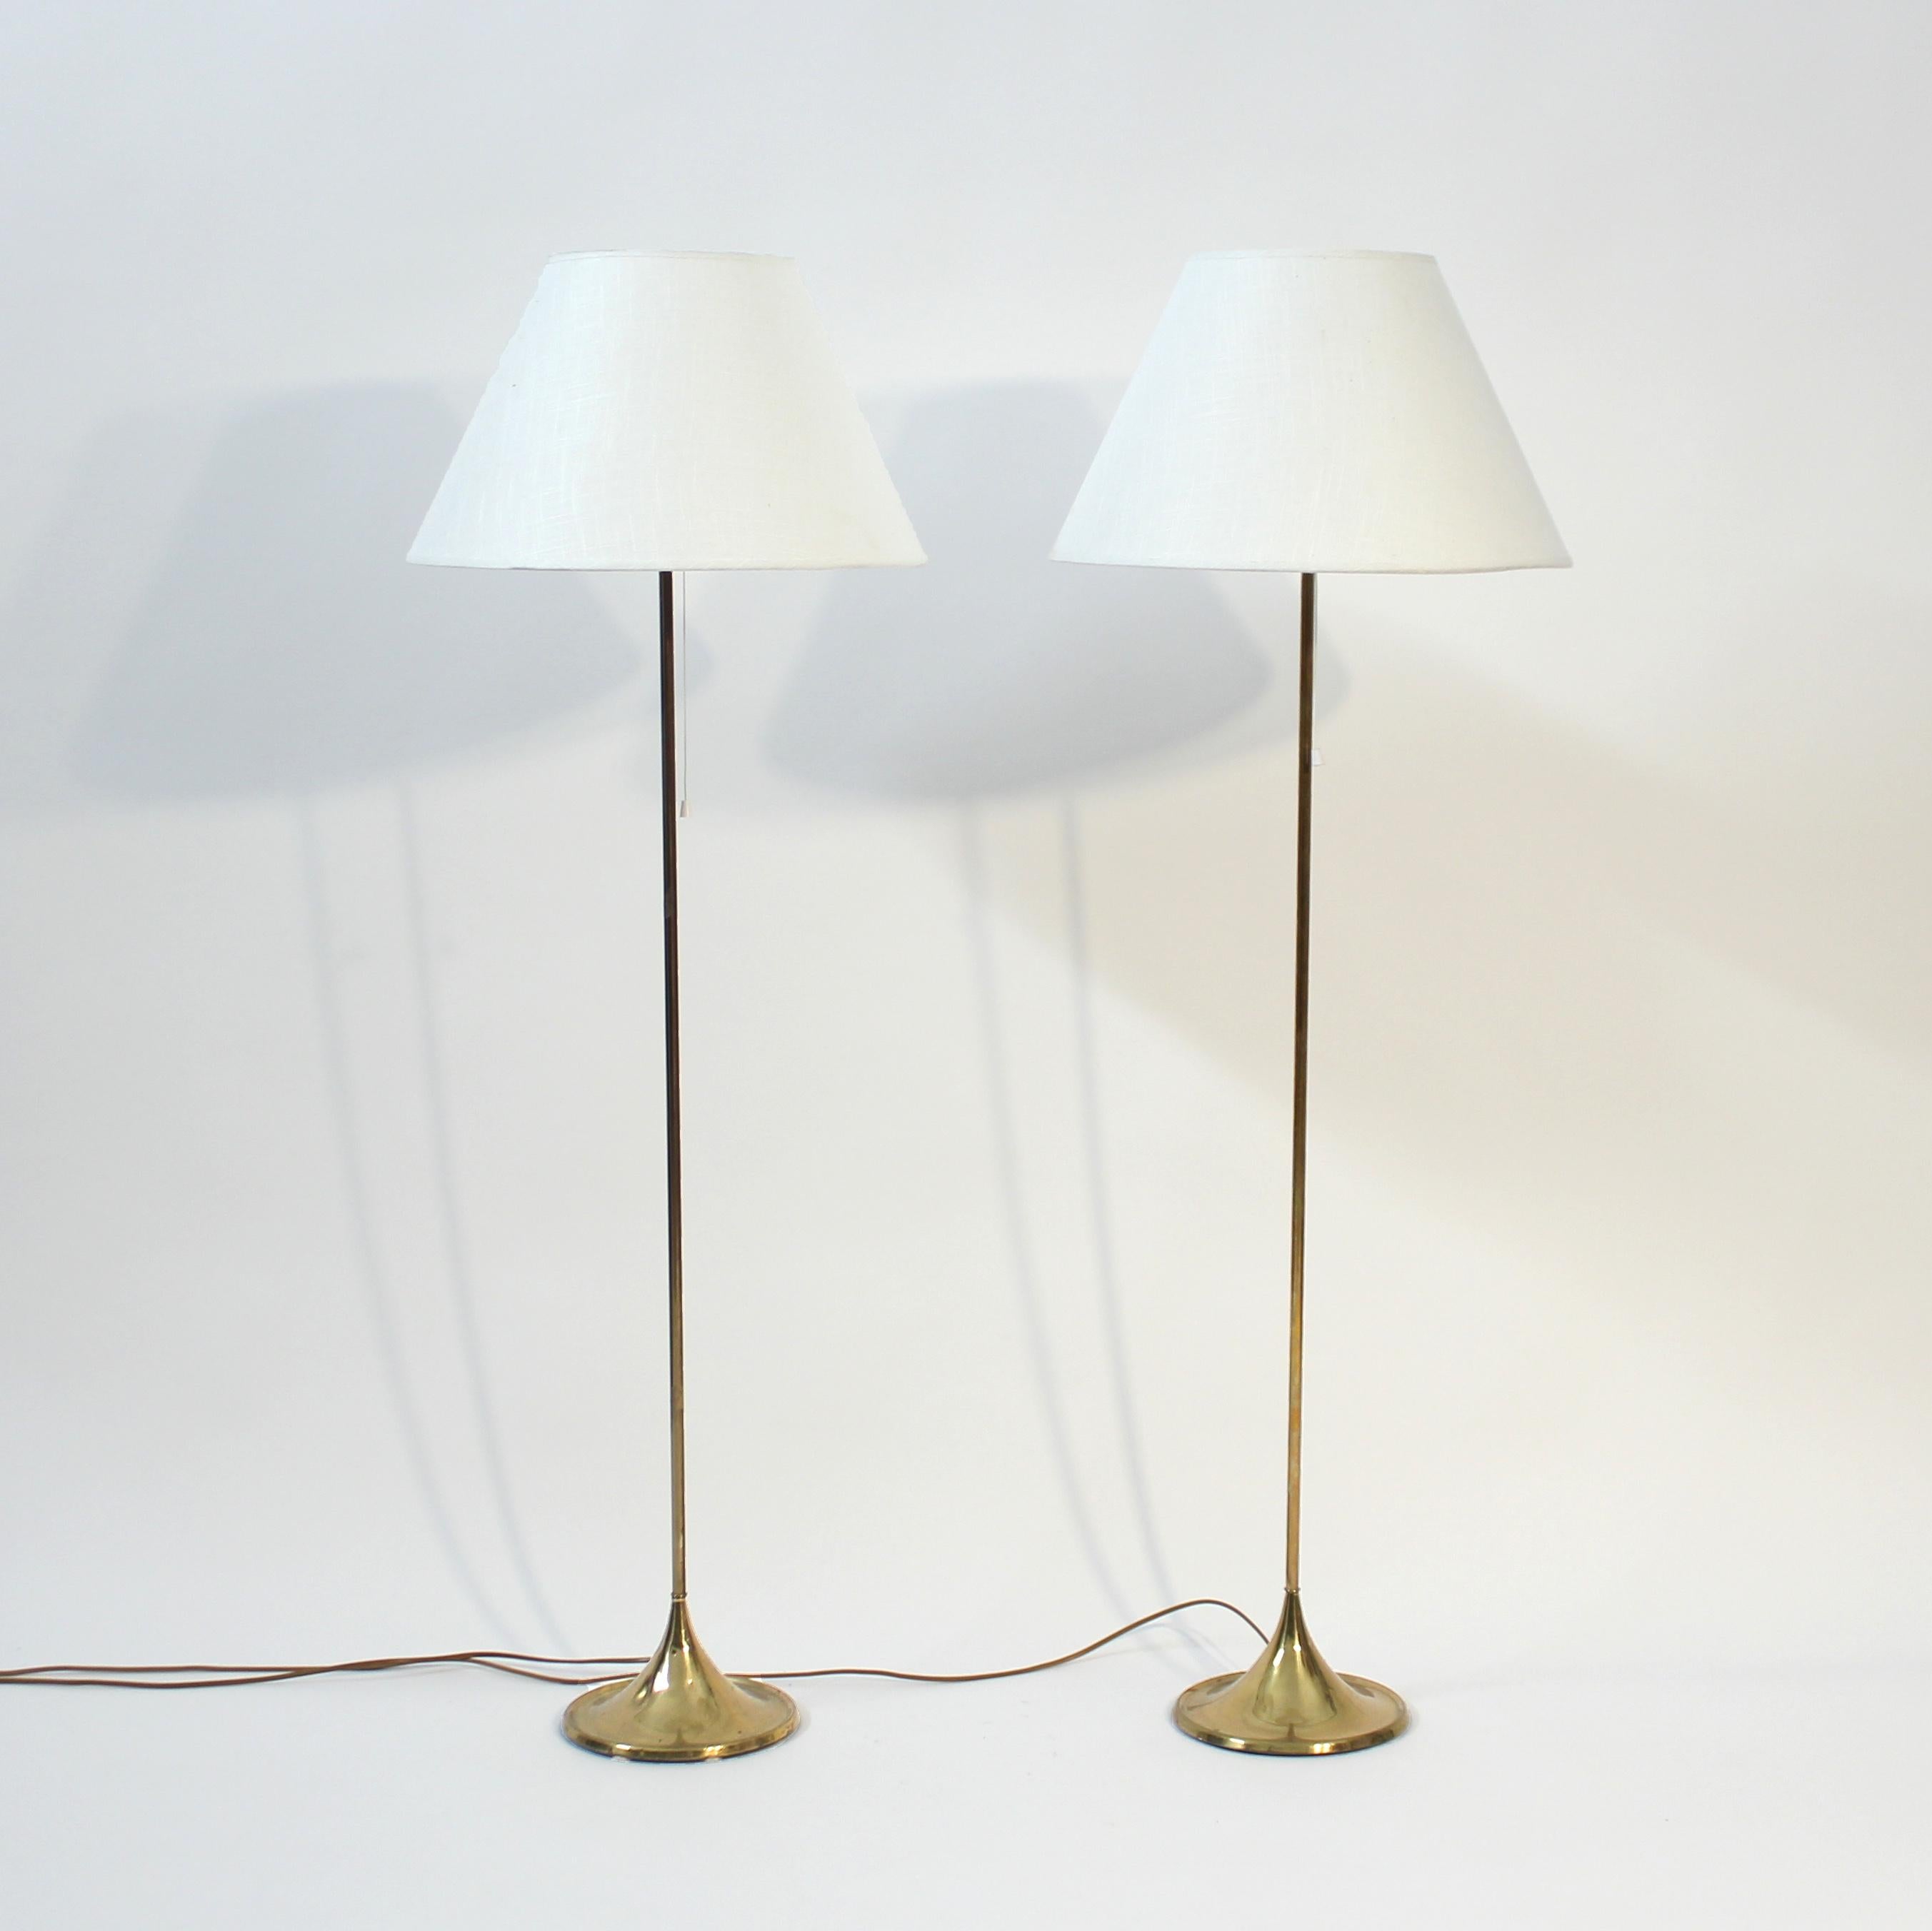 ir of 1960s Bergboms floor lamp, model G-25. Brass stem on top of a round, almost cone shaped brass base. Mounted with later off-white fabric shades. Light ware consistent with age and use.